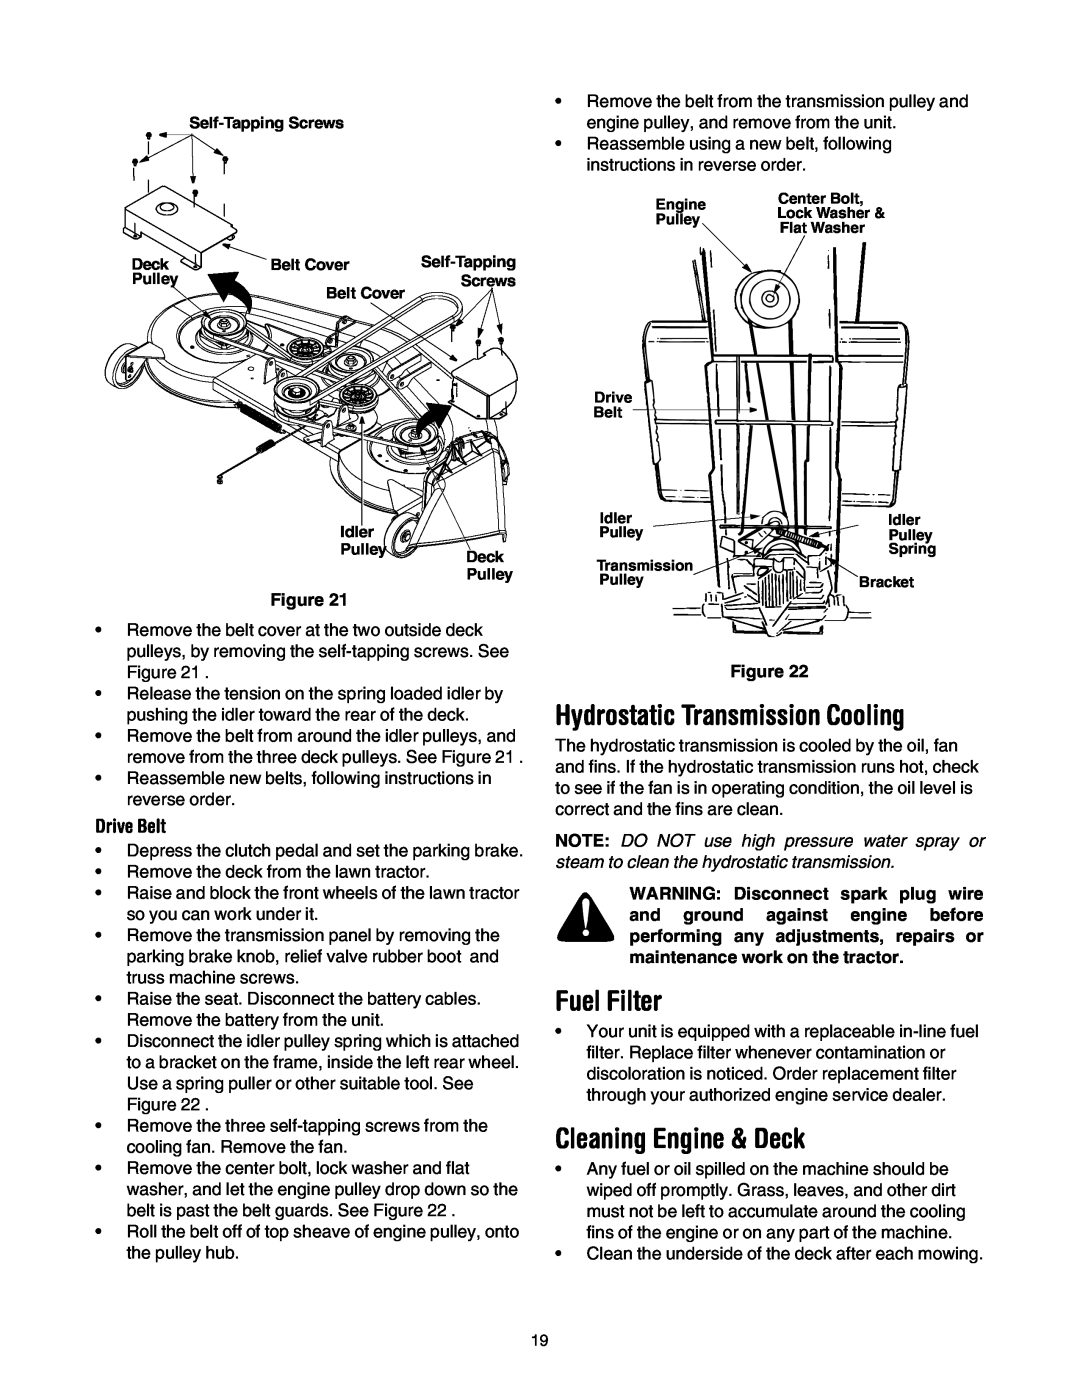 MTD 690 through 699 Hydrostatic Transmission Cooling, Fuel Filter, Cleaning Engine & Deck, instructions in reverse order 